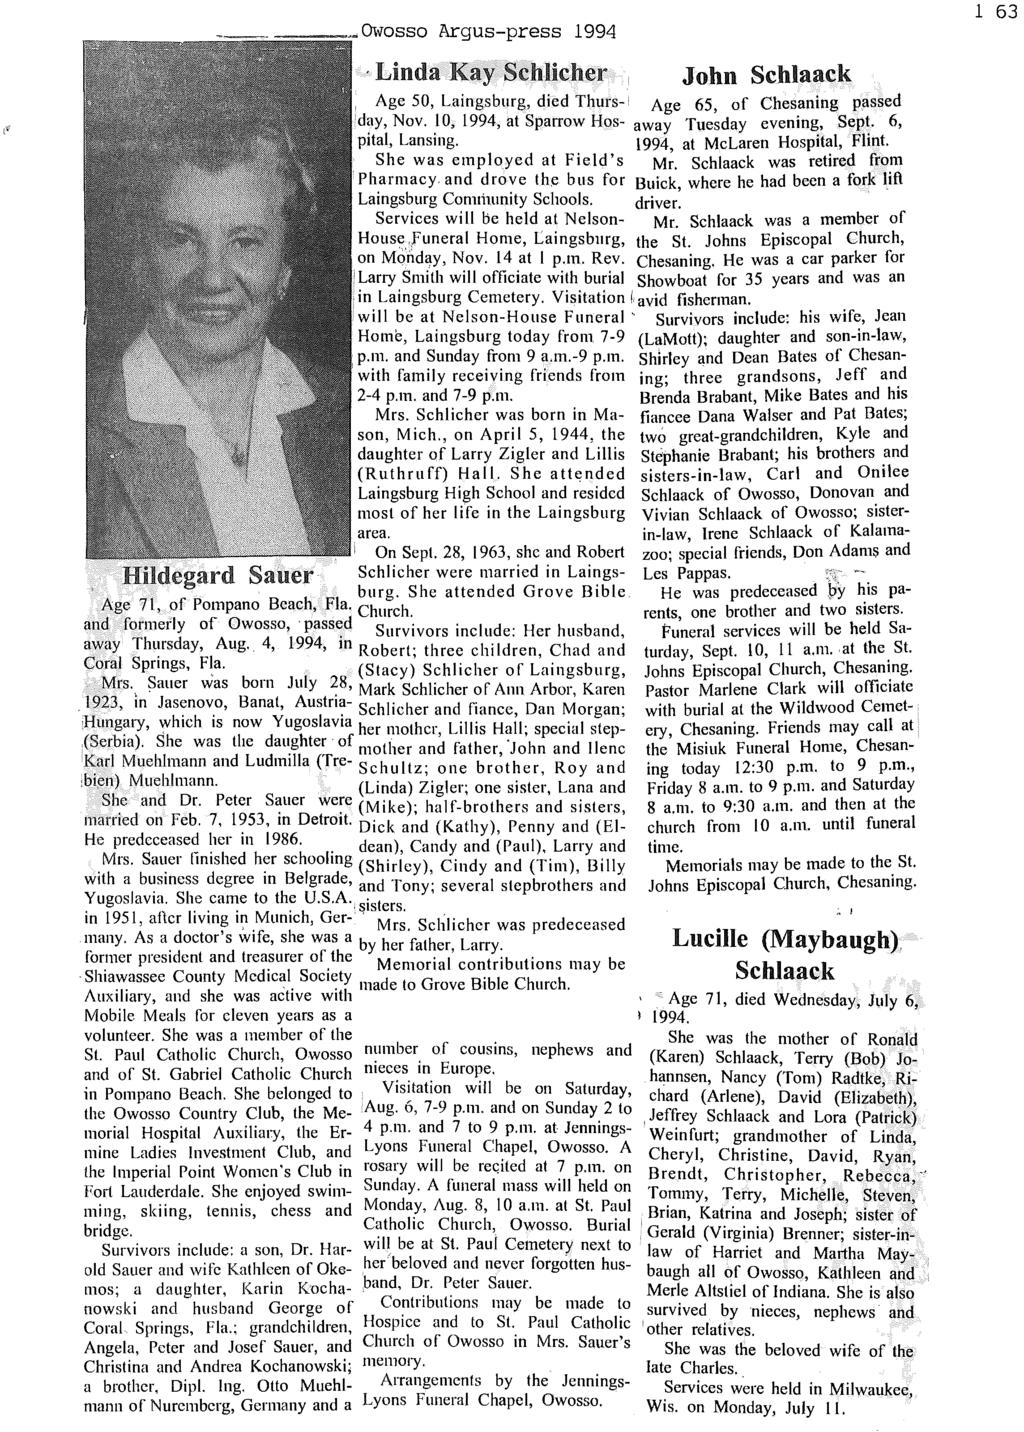 ~Owosso Argus-press 1994 1 63, Linda Kay Schlicher John Schlaack,.Age 50, Laingsburg, died Thurs- Age 65, of Chesaning passed day, Nov. 10, 1994, at Sparrow Hos- away Tuesday evening, Sept.